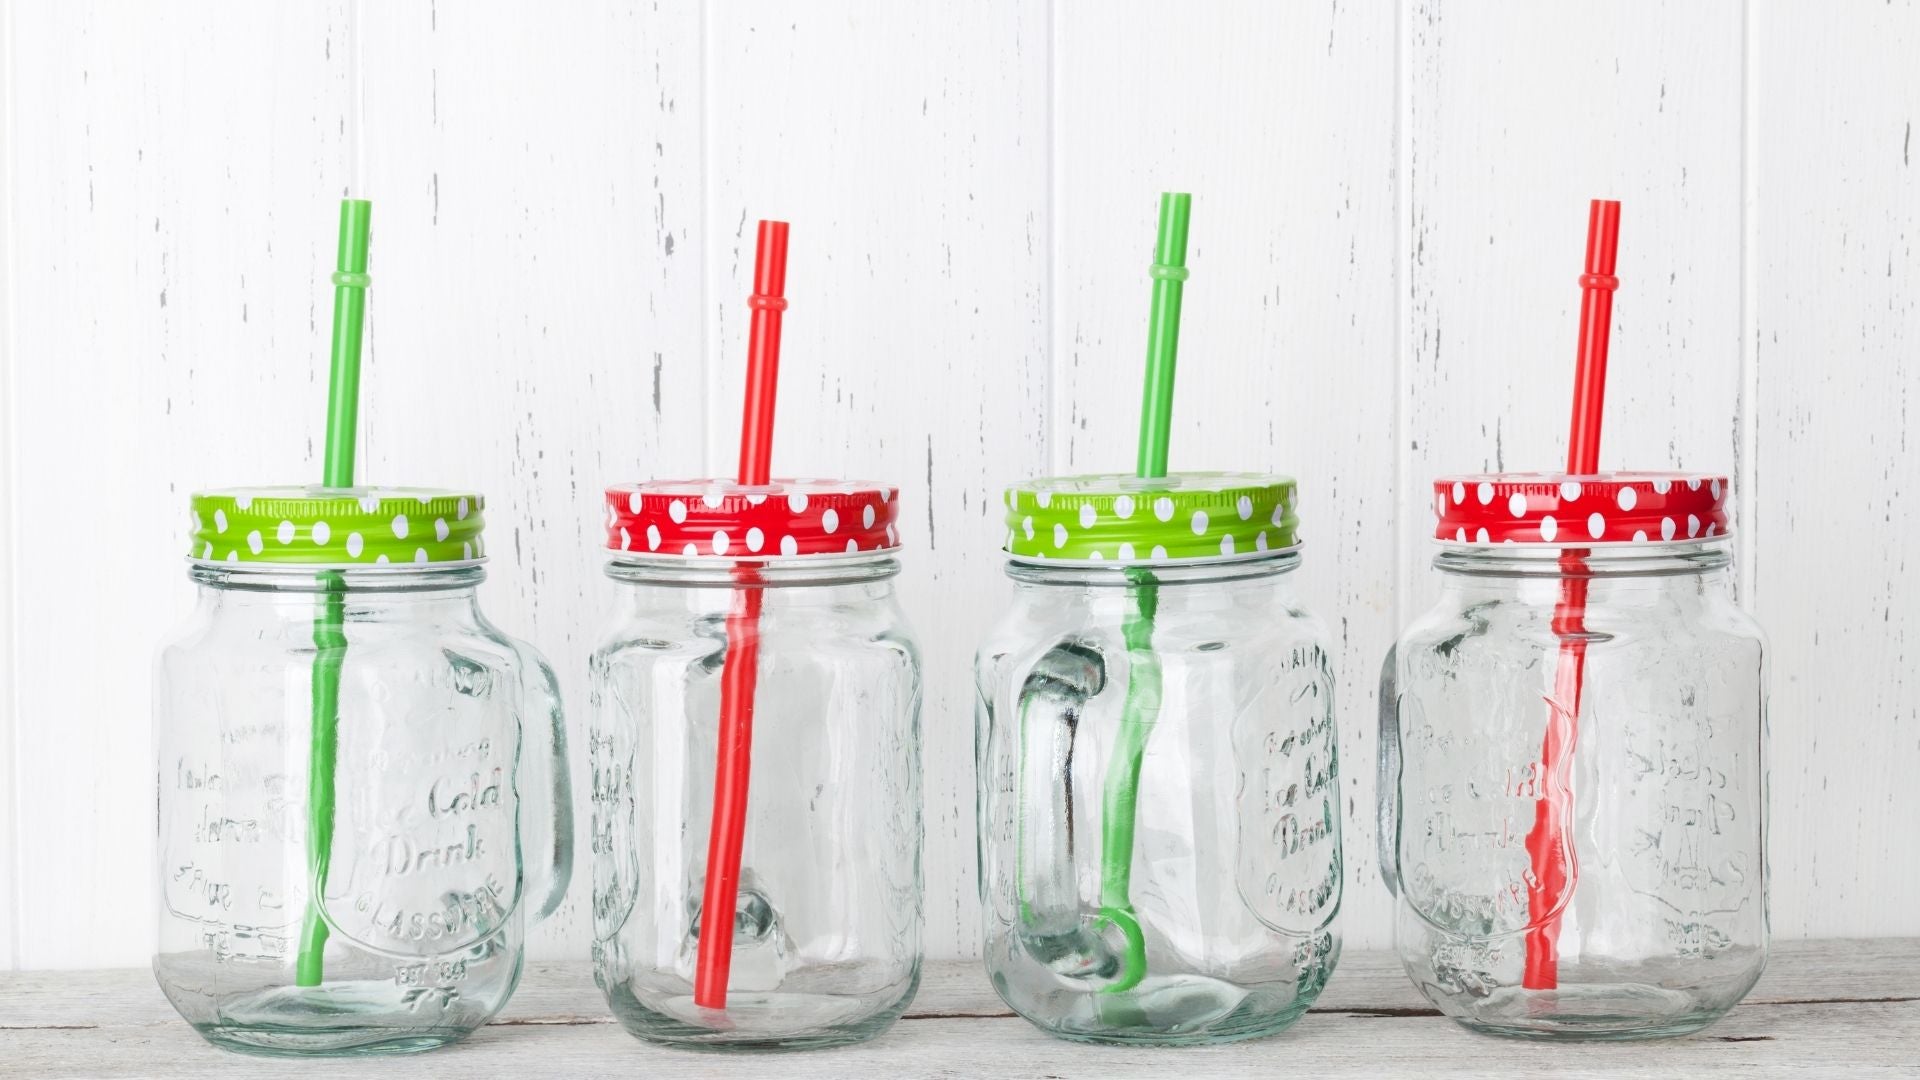 Avoid Using Metal Straws With Lids